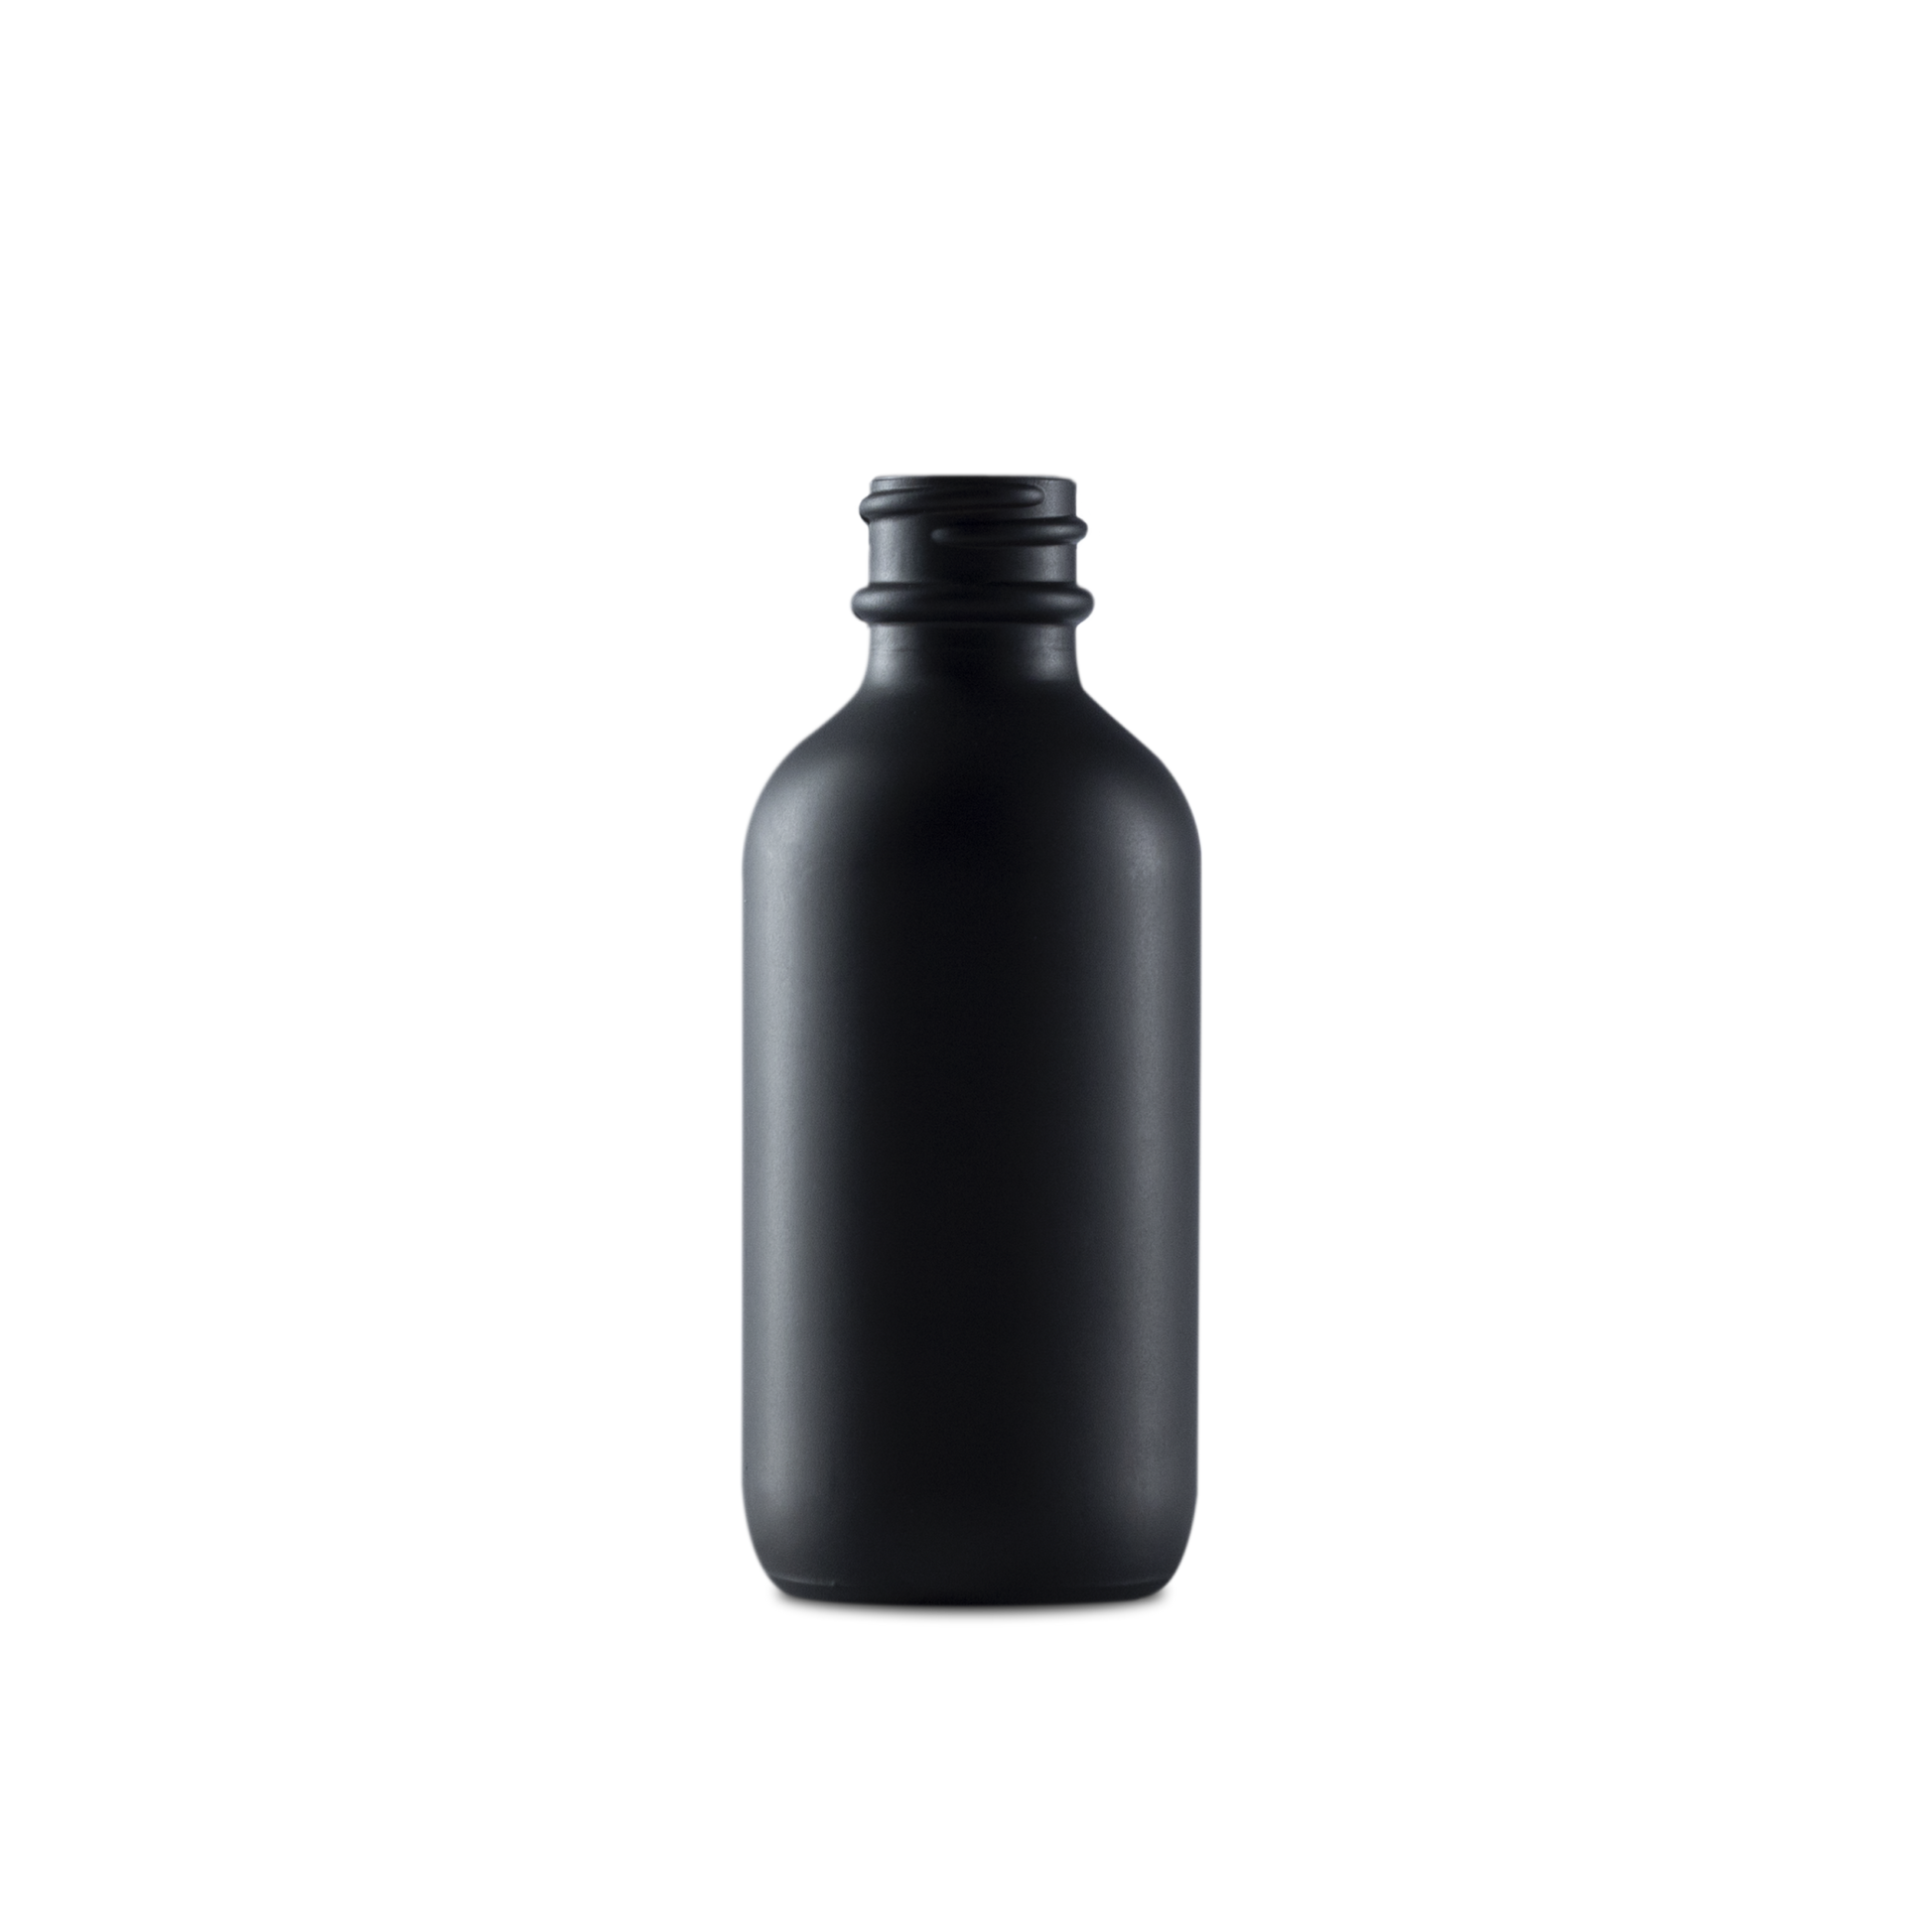 2 oz black frosted boston round glass bottle is the perfect container for your hair oils. This dark, sleek glass gives an elegant touch.